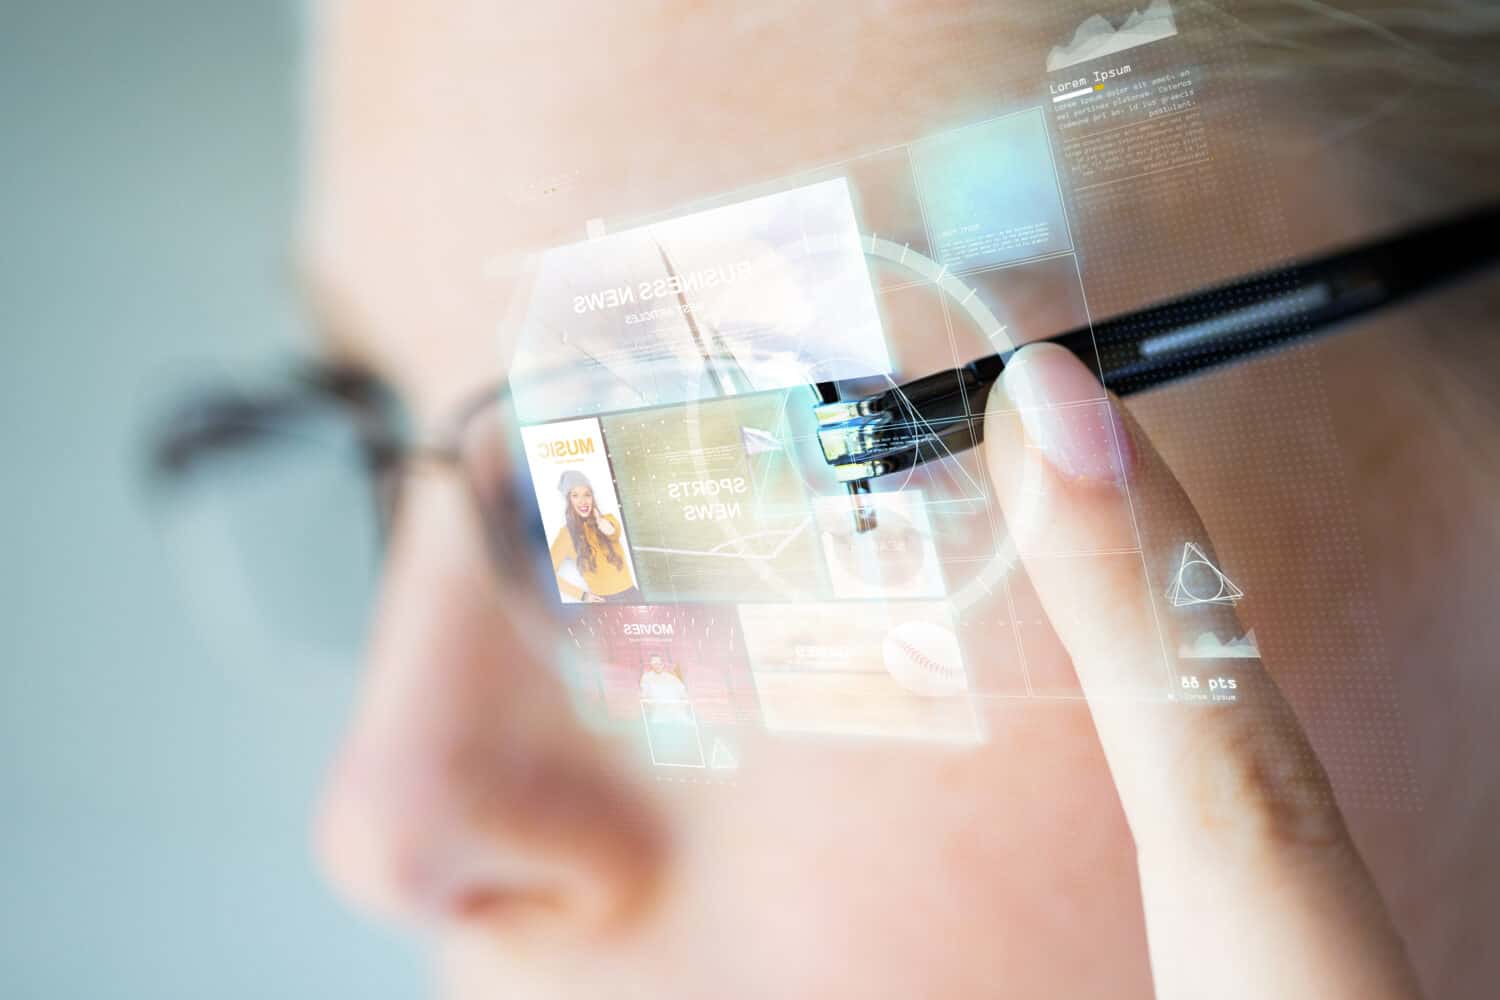 Best smart glasses  The most exciting models: current and future